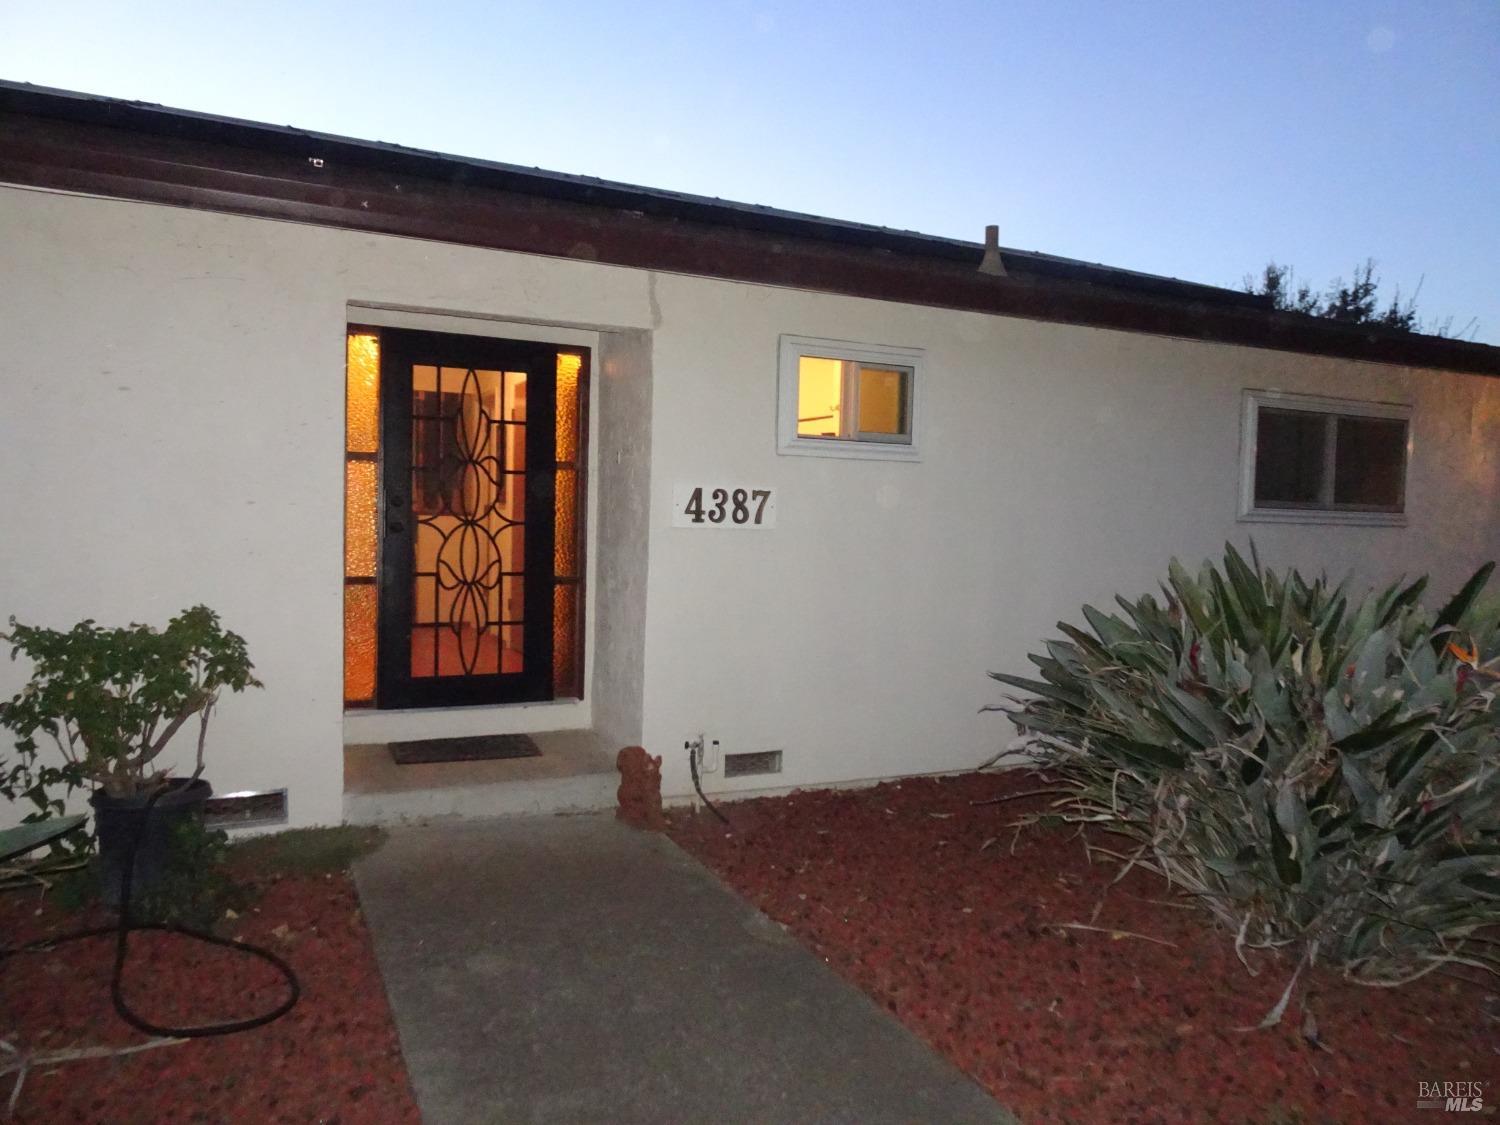 Photo of 4387-4389 Solano Rd in Fairfield, CA